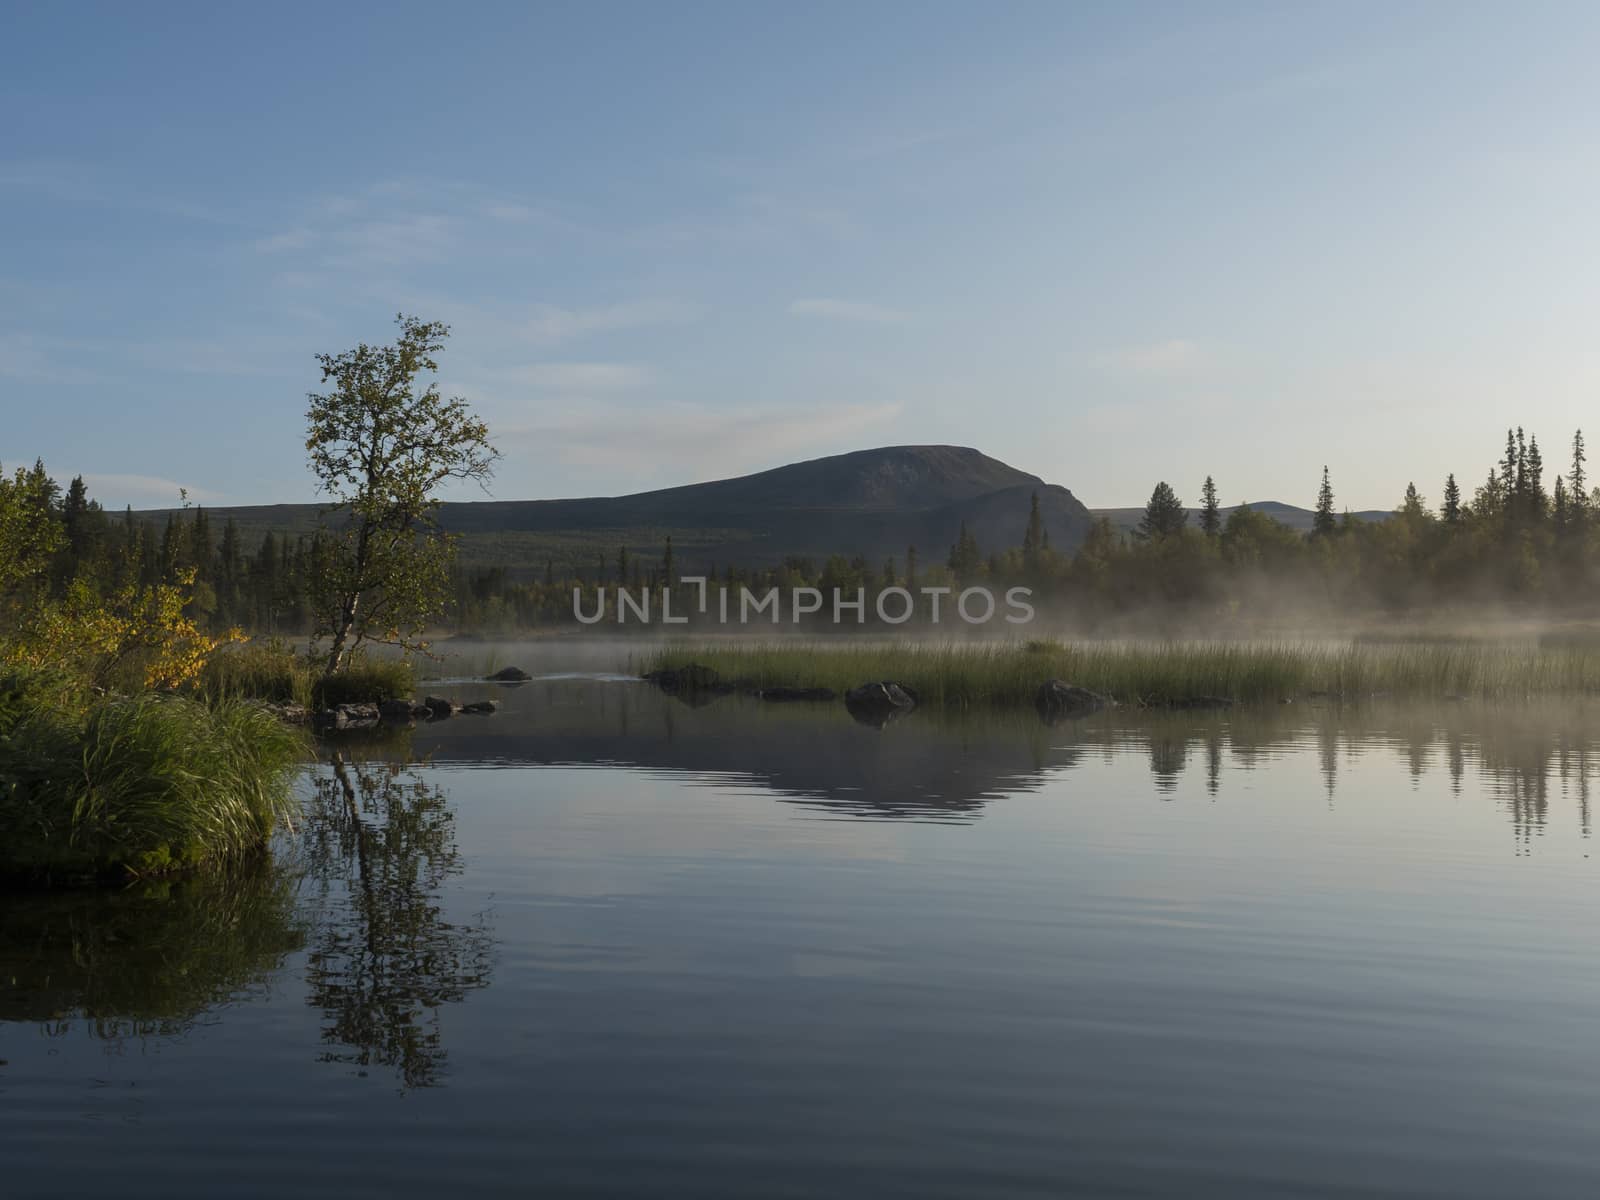 Beautiful morning sunrise over lake Sjabatjakjaure with haze mist in Sweden Lapland nature. Mountains, birch trees, spruce forest, rock boulders and grass. Sky, clouds and clear water